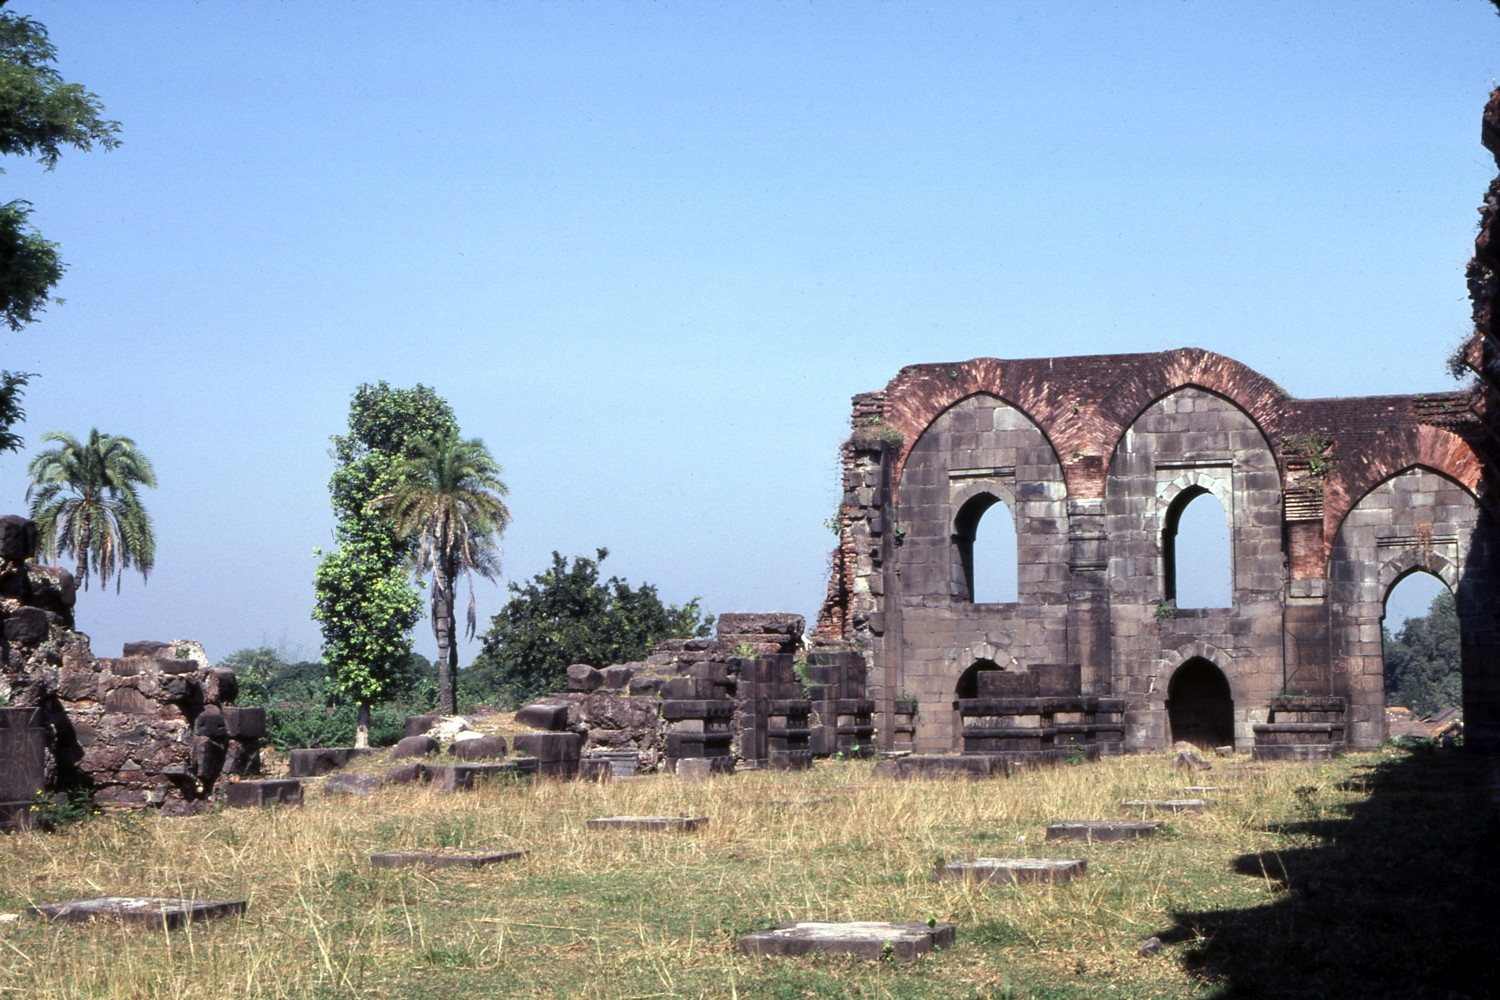 View of the ruined musalla, looking to northwest